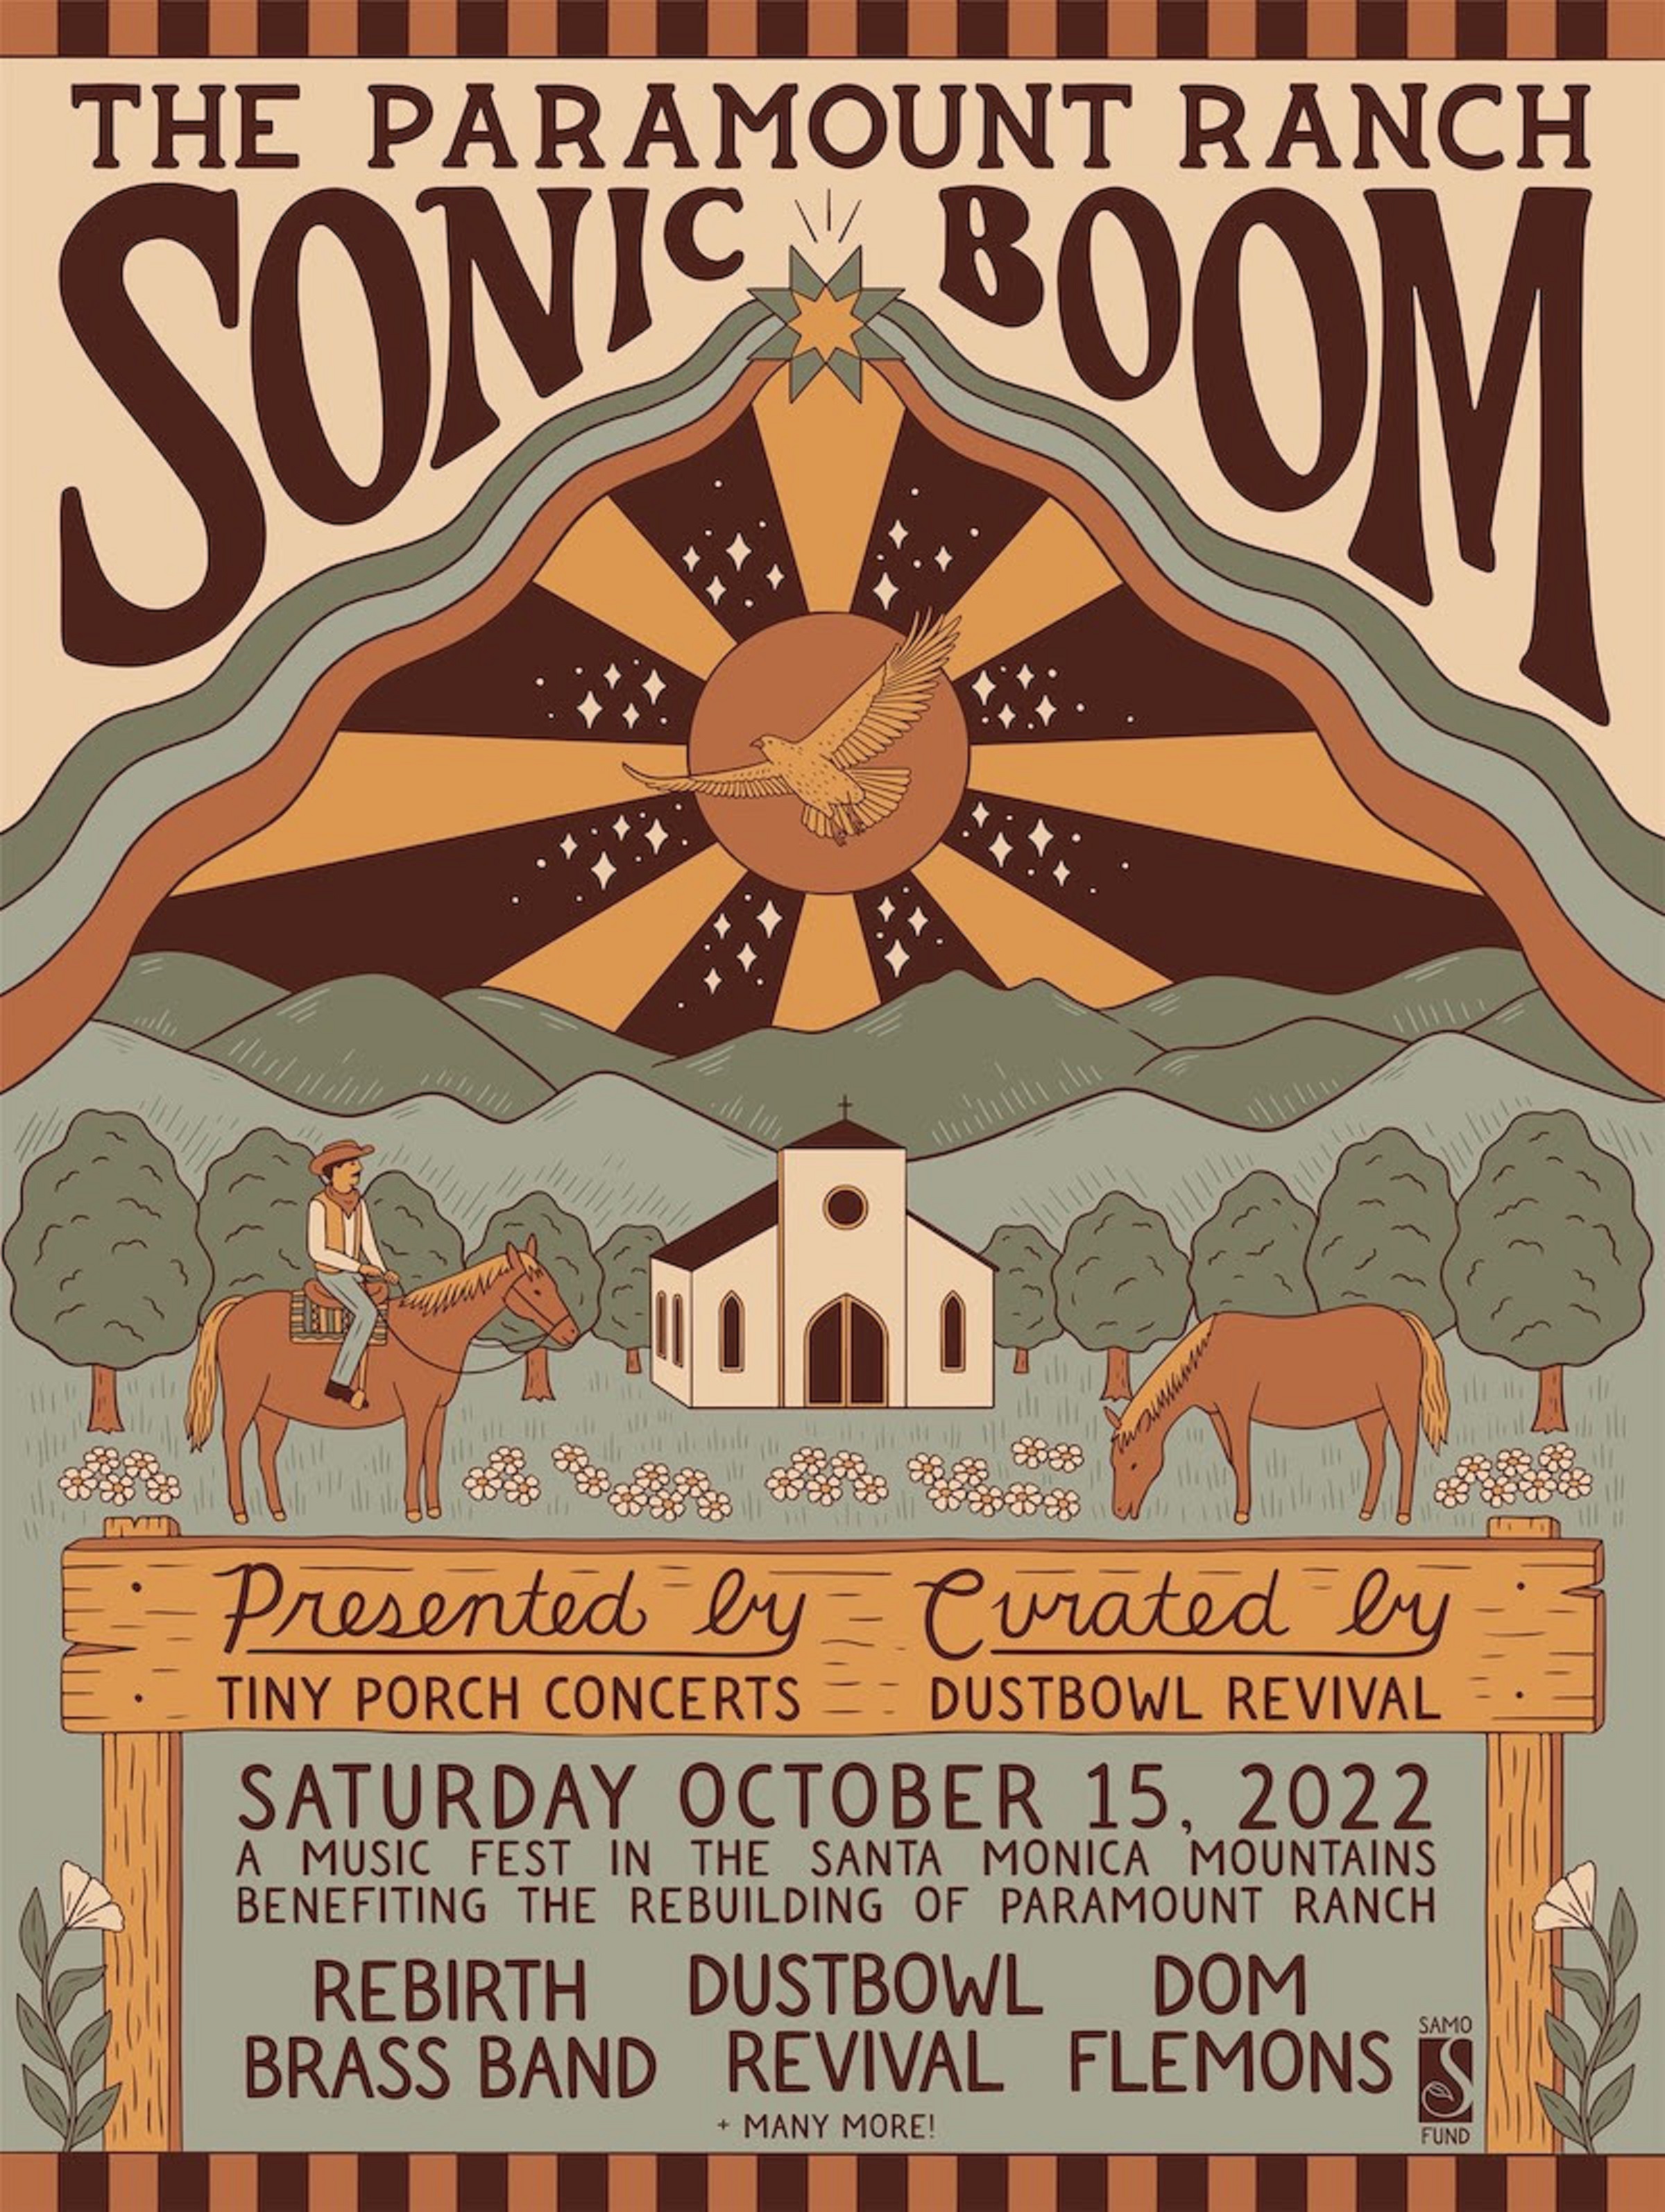 Dustbowl Revival team with Tiny Porch Concerts for the Paramount Ranch Sonic Boom Festival ft. Rebirth Brass Band, Dom Flemons & more, proceeds to help rebuild the fire-devastated Paramount Ranch